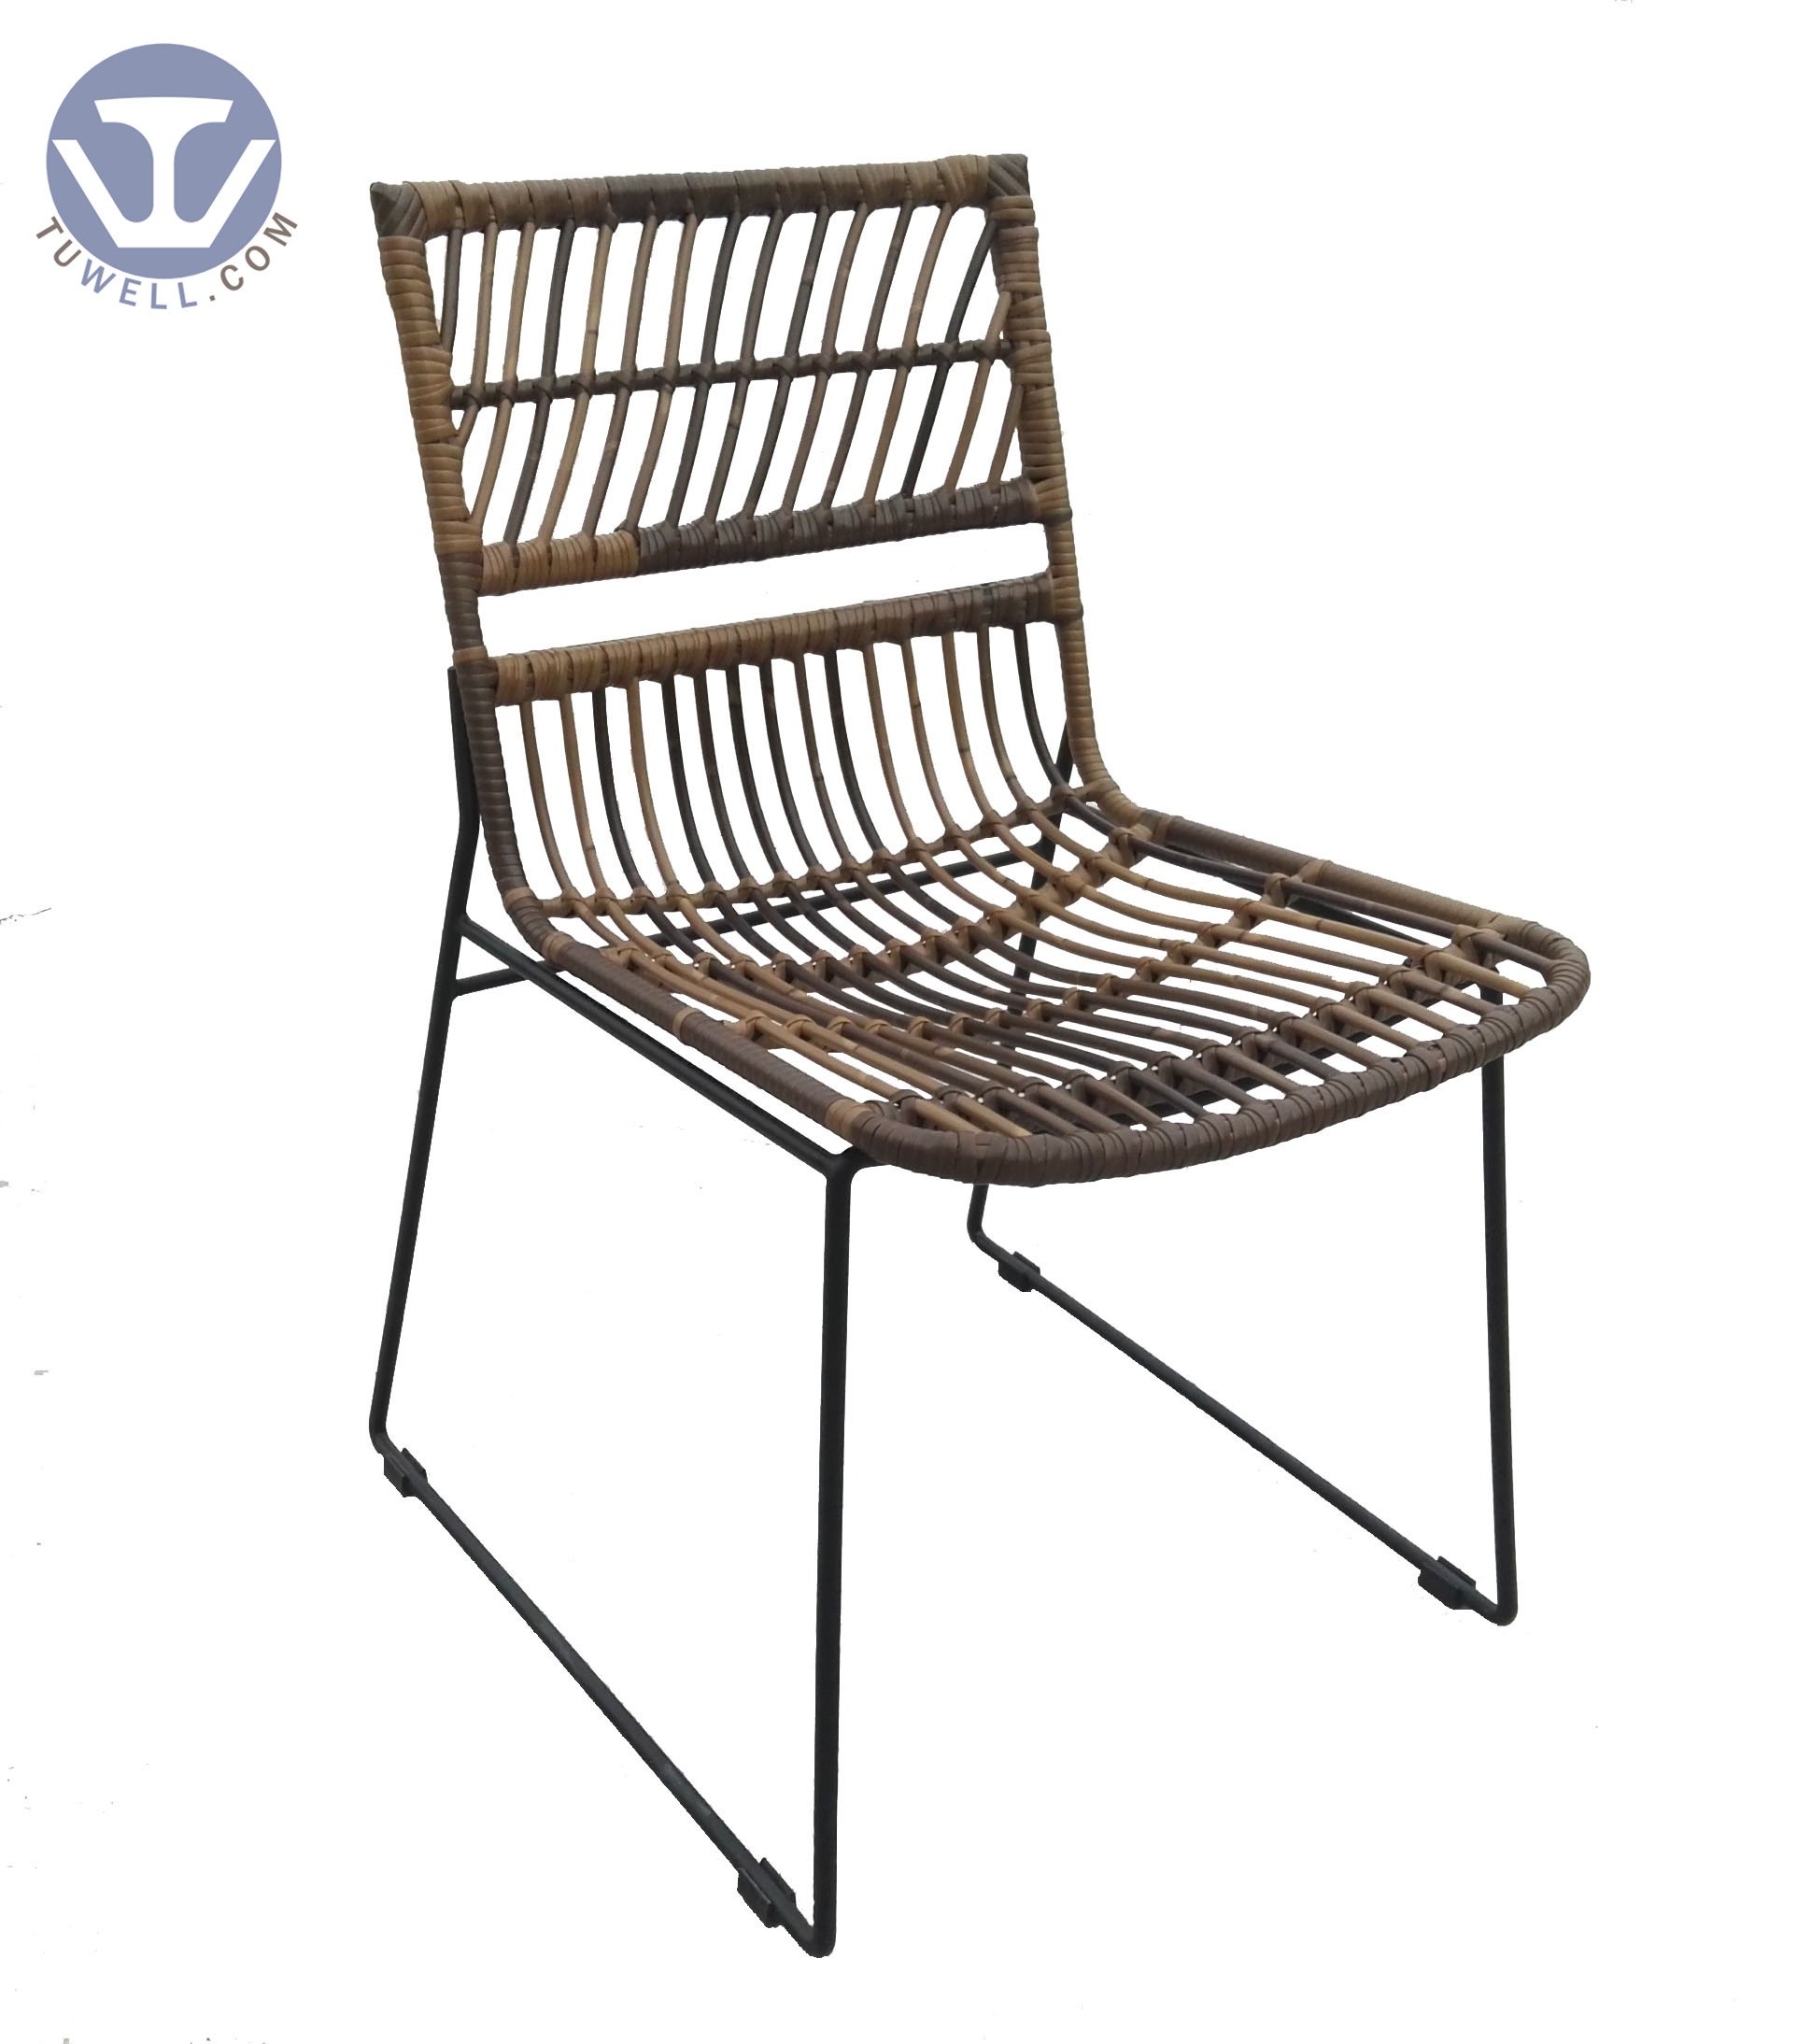 TW8716 Rattan chair indoor and outdoor rattan chair natural garden chair  European leisure style